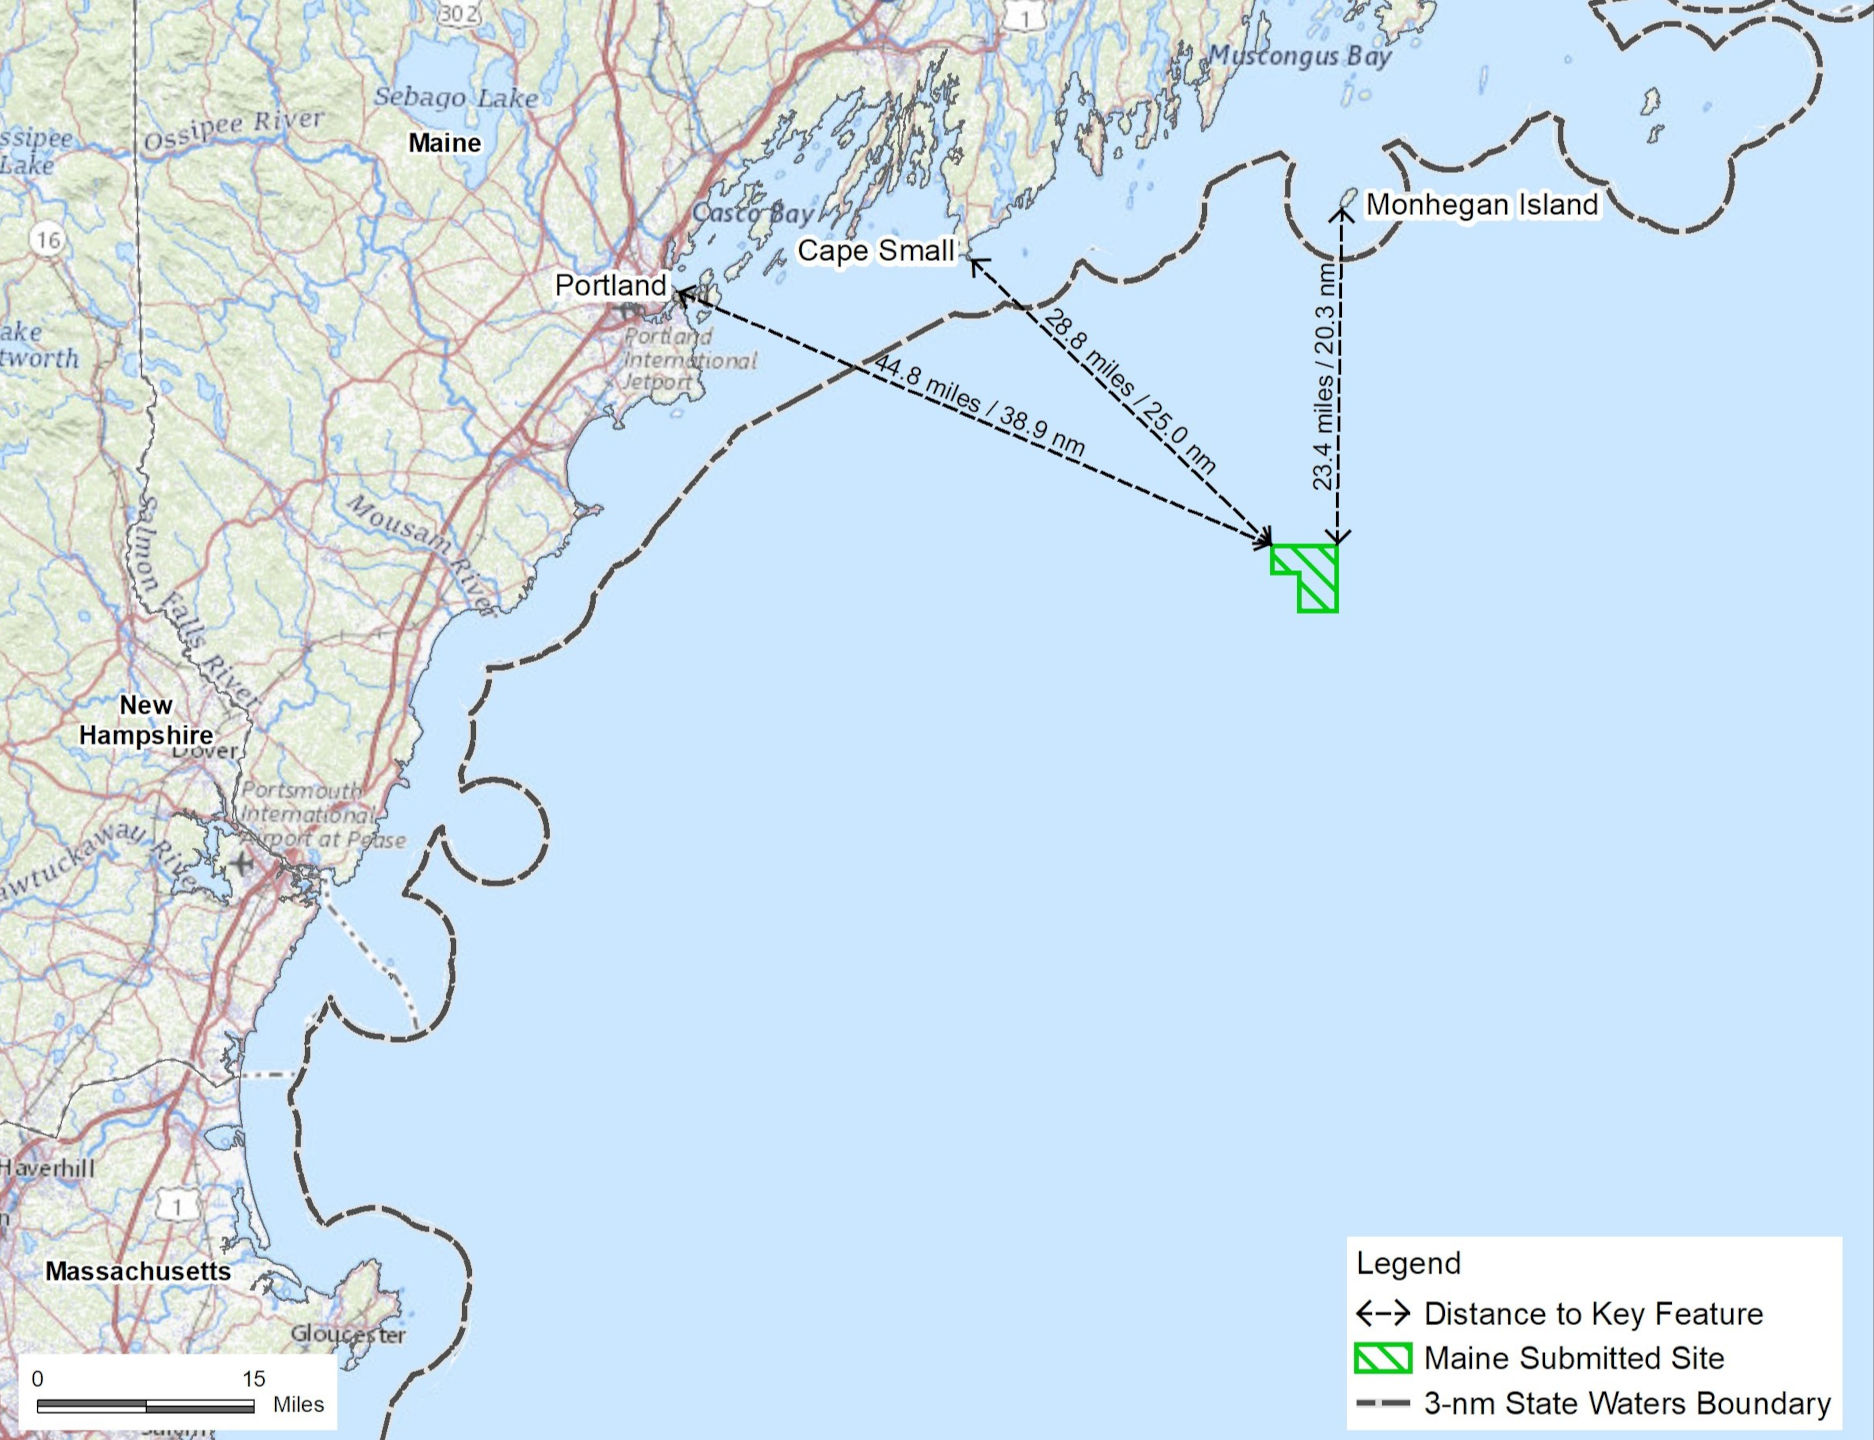 Map by the Bureau of Ocean Energy Management showing the placement of the Maine Floating Wind Research Array